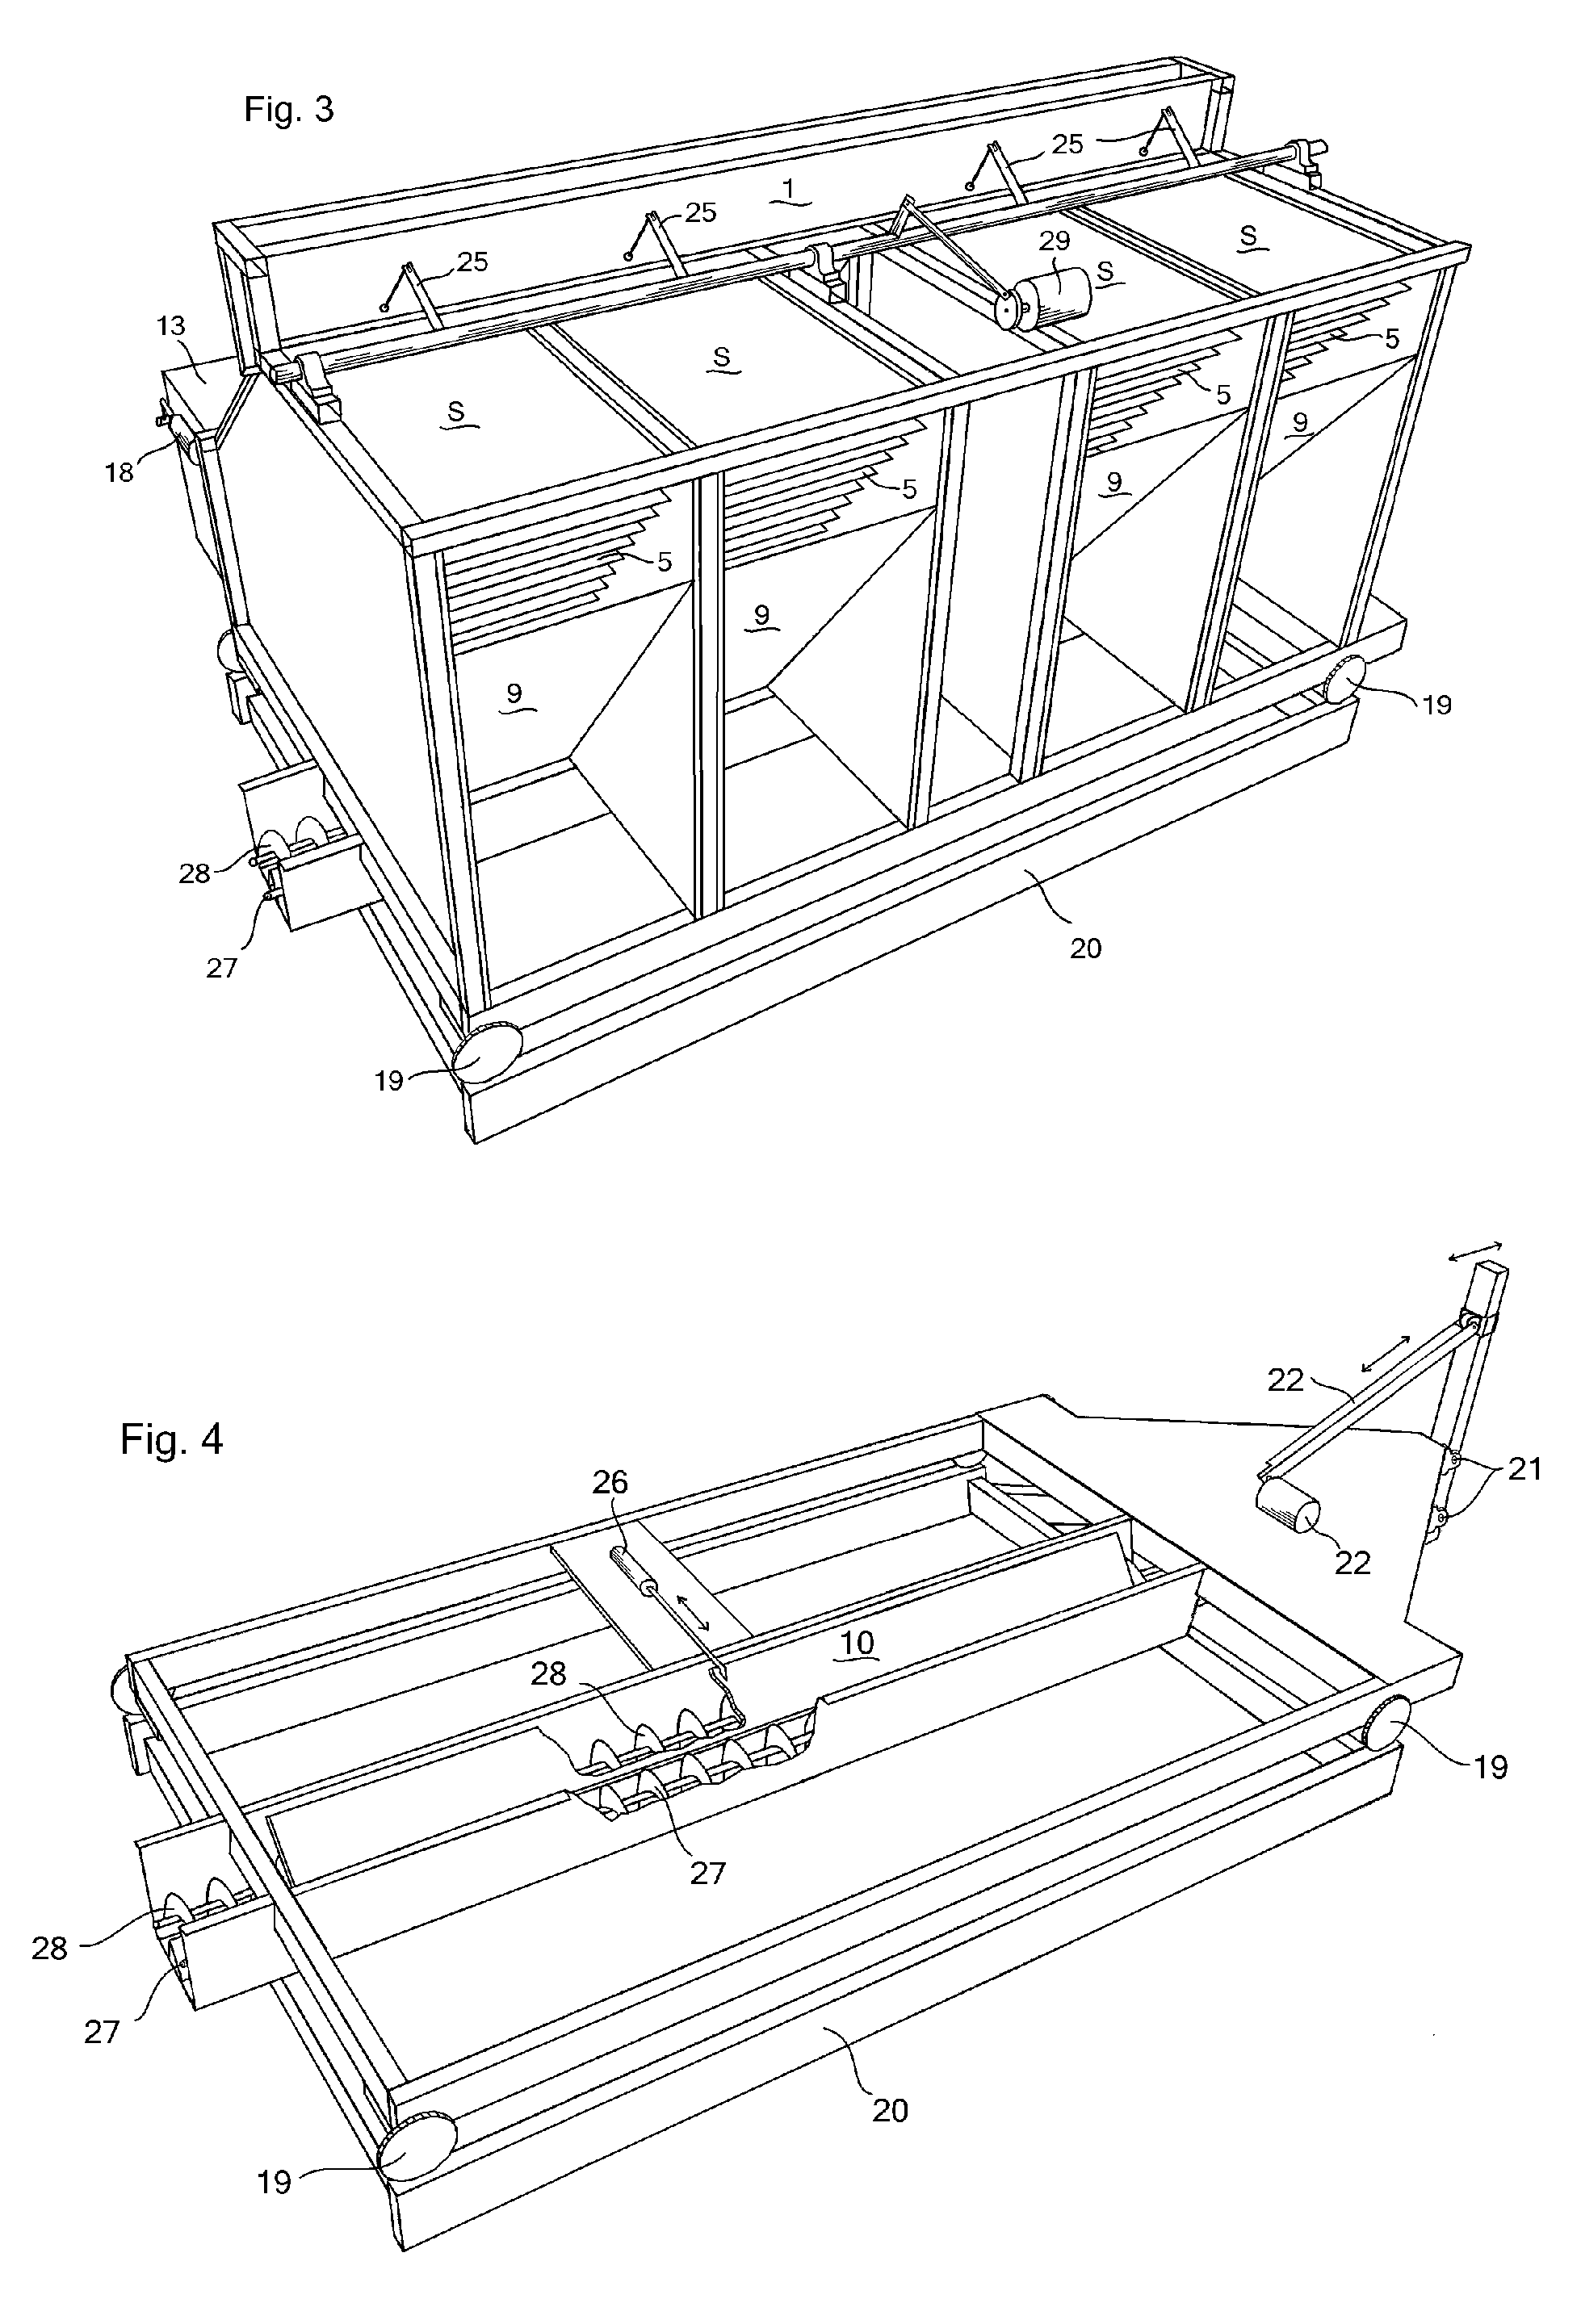 Method and Apparatus for Separating Oil Seeds